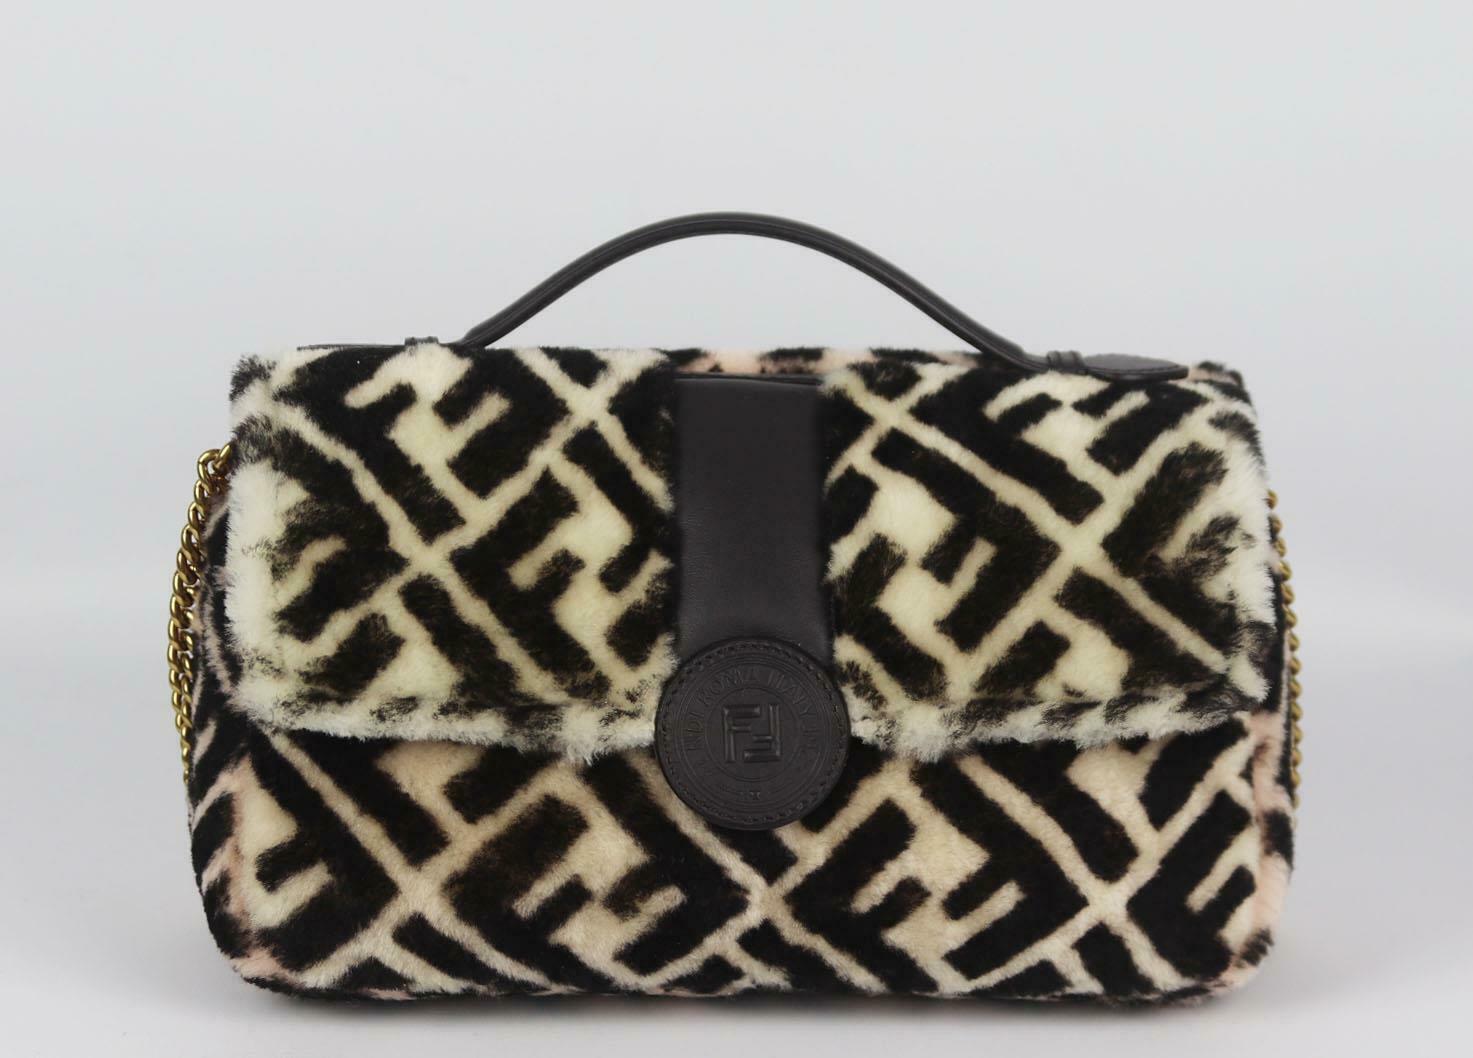 This stunning '1974 Double F' shoulder bag by Fendi bag has been made in Italy from plush shearling fur and printed with the iconic logo, the bag has two-sides, one light-pink and the other beige, it's fastening opens to reveal a beige interior